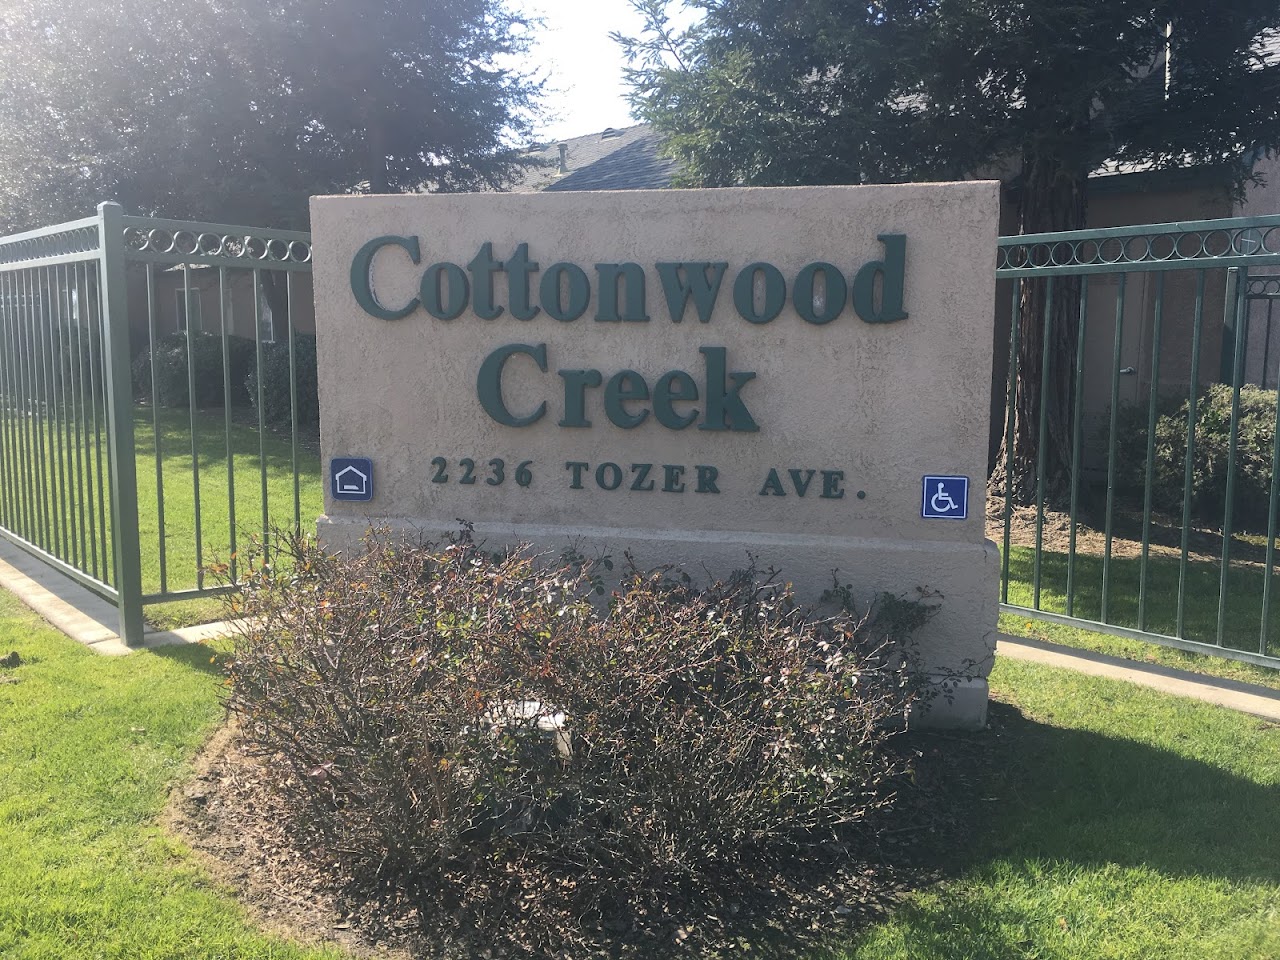 Photo of COTTONWOOD CREEK. Affordable housing located at 2236 TOZER ST MADERA, CA 93638